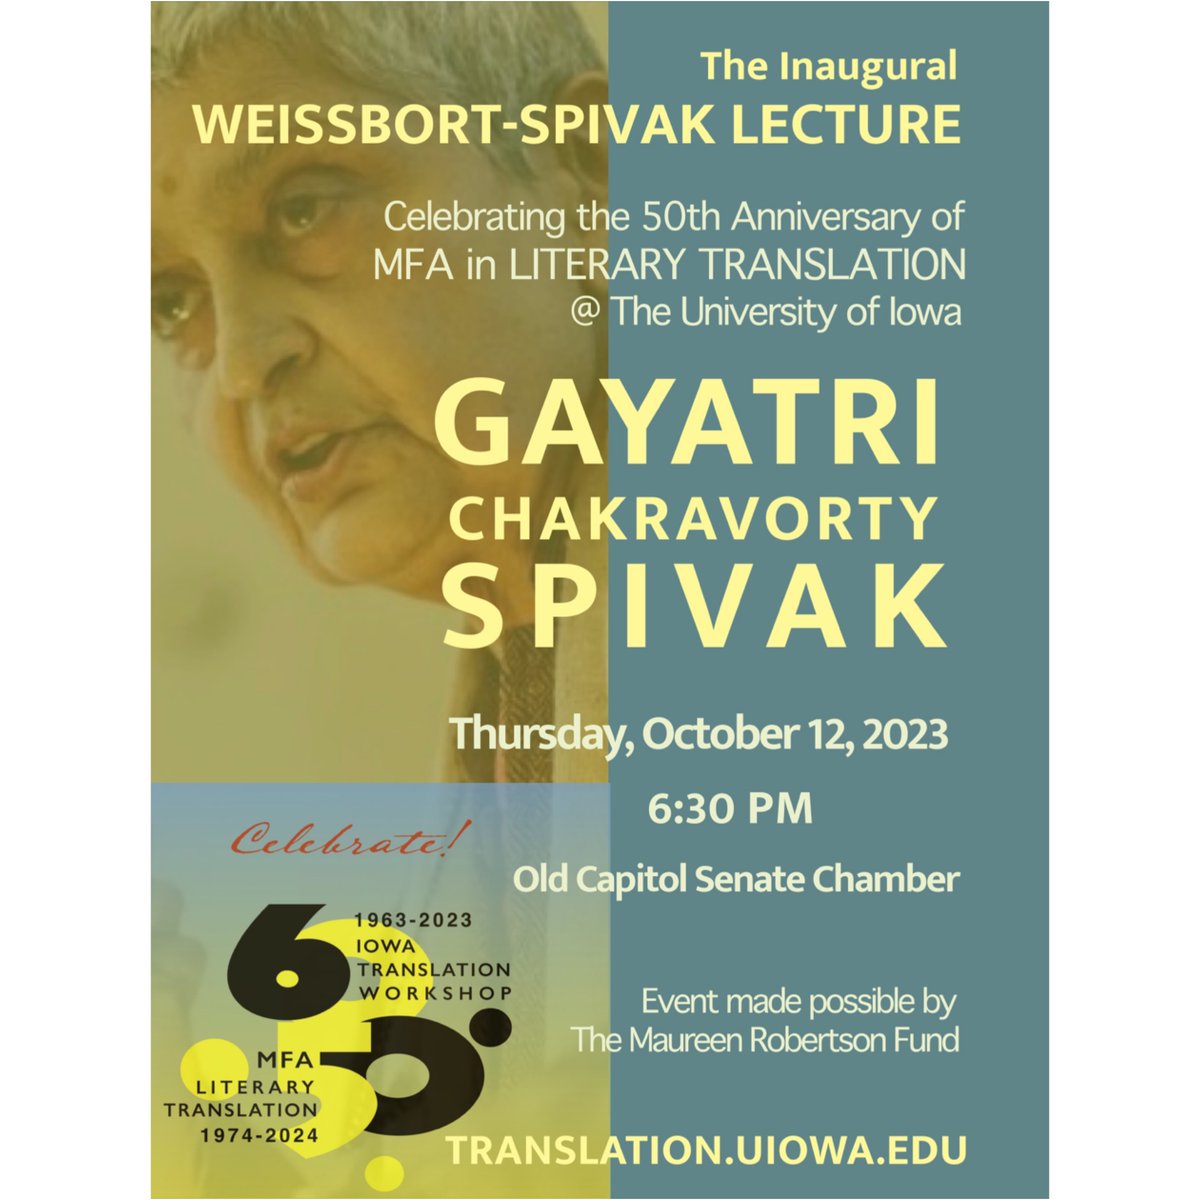 Dr. Maureen Robertson passed in July, and since then I've been working with the UIowa Literary Translation Program on her legacy. I'm happy to announce the Maureen Robertson Fund and its first event, the first Weissbort-Spivak lecture, by Dr. Gayatri Spivak, this Oct 12.